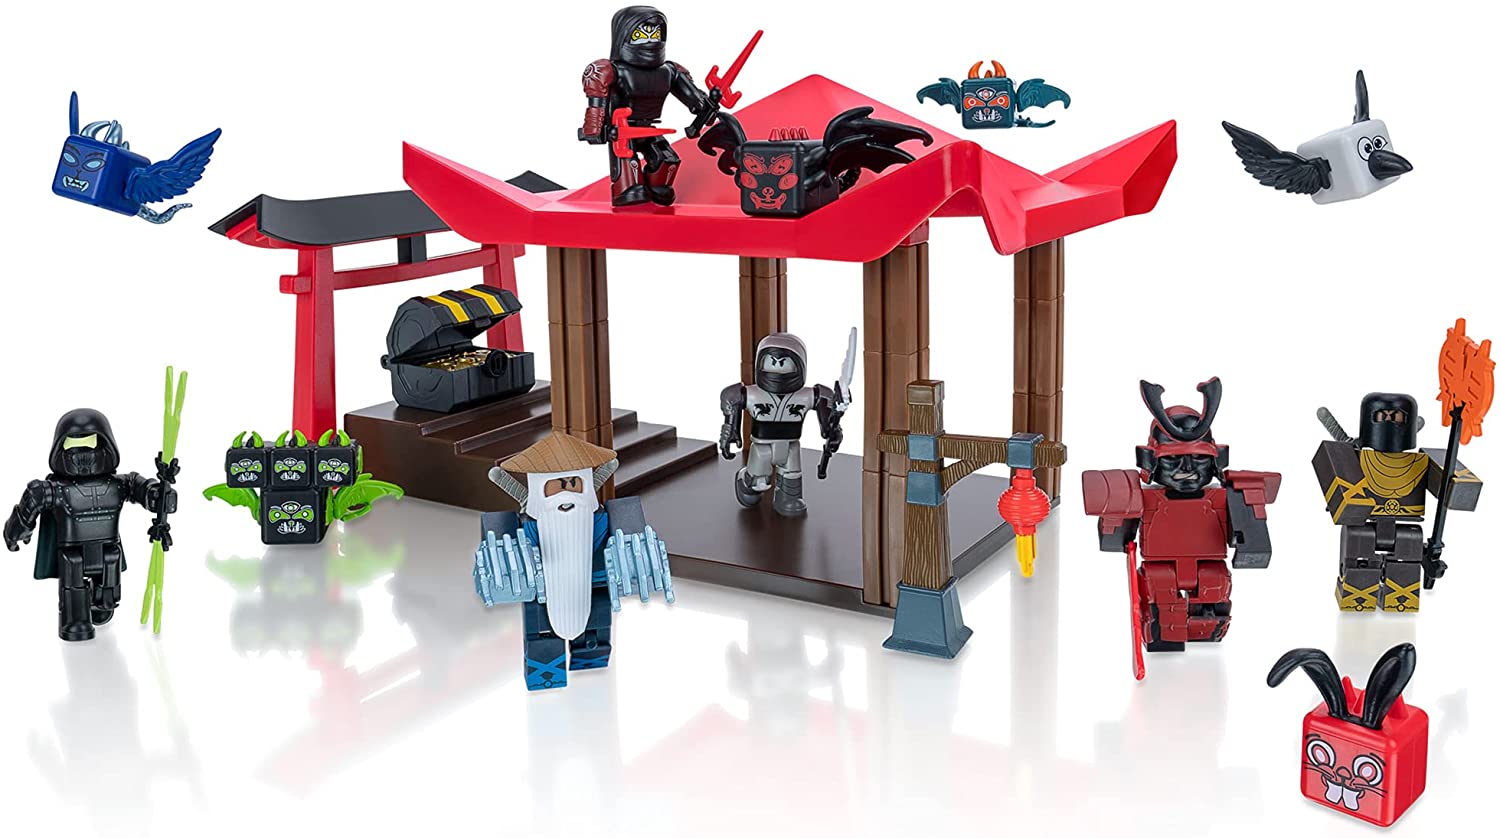 Roblox Action Collection - Ninja Legends Deluxe Playset w/ Exclusive Virtual Item $18.65 + Free Shipping w/ Prime or on $25+